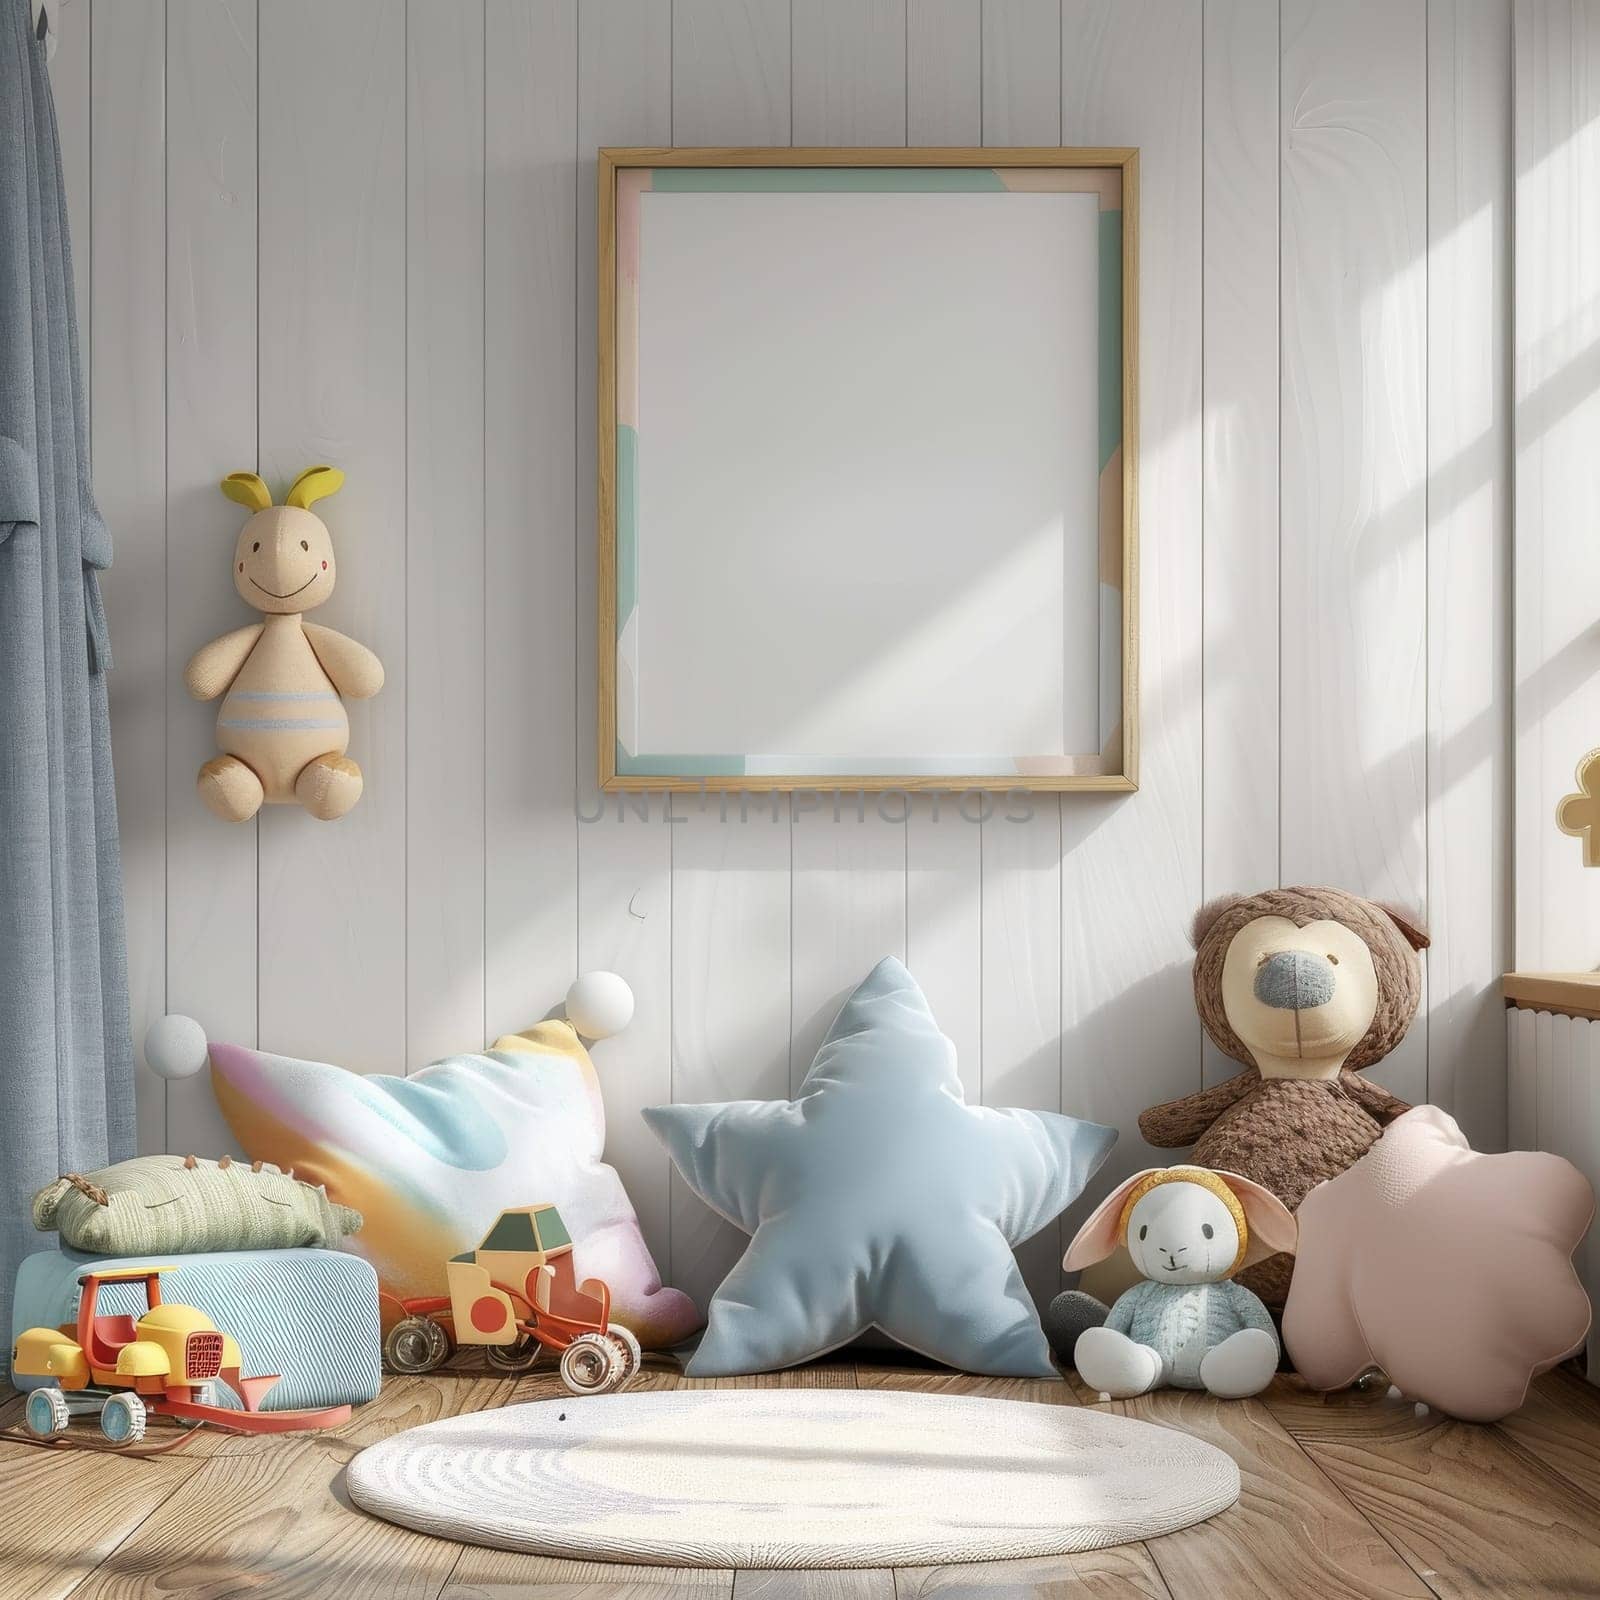 A room with a white wall and a black frame. There are many toys, including a teddy bear and a toy car. There are also many colorful balls hanging from the ceiling. The room has a playful